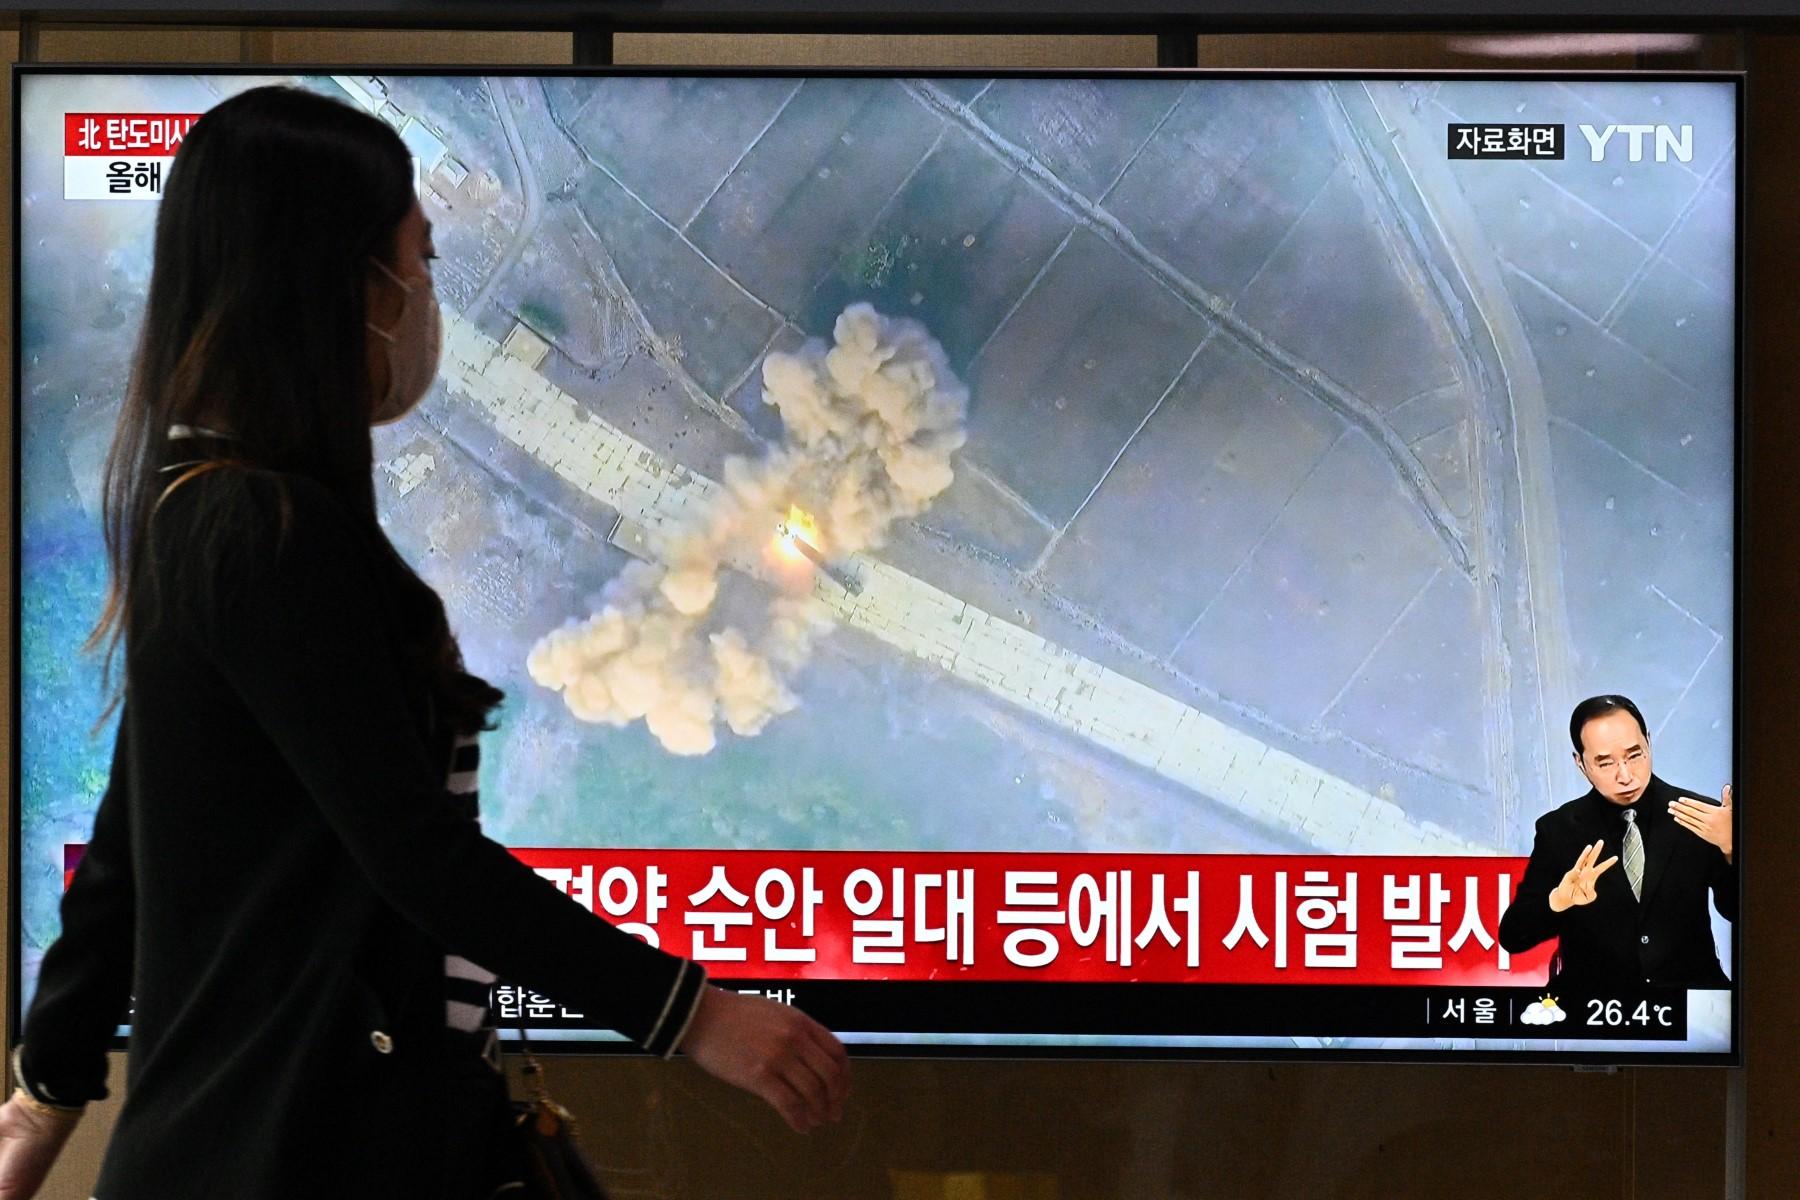 A woman walks past a screen showing a news broadcast with file footage of a North Korean missile test, at a railway station in Seoul on June 5. Photo: AFP